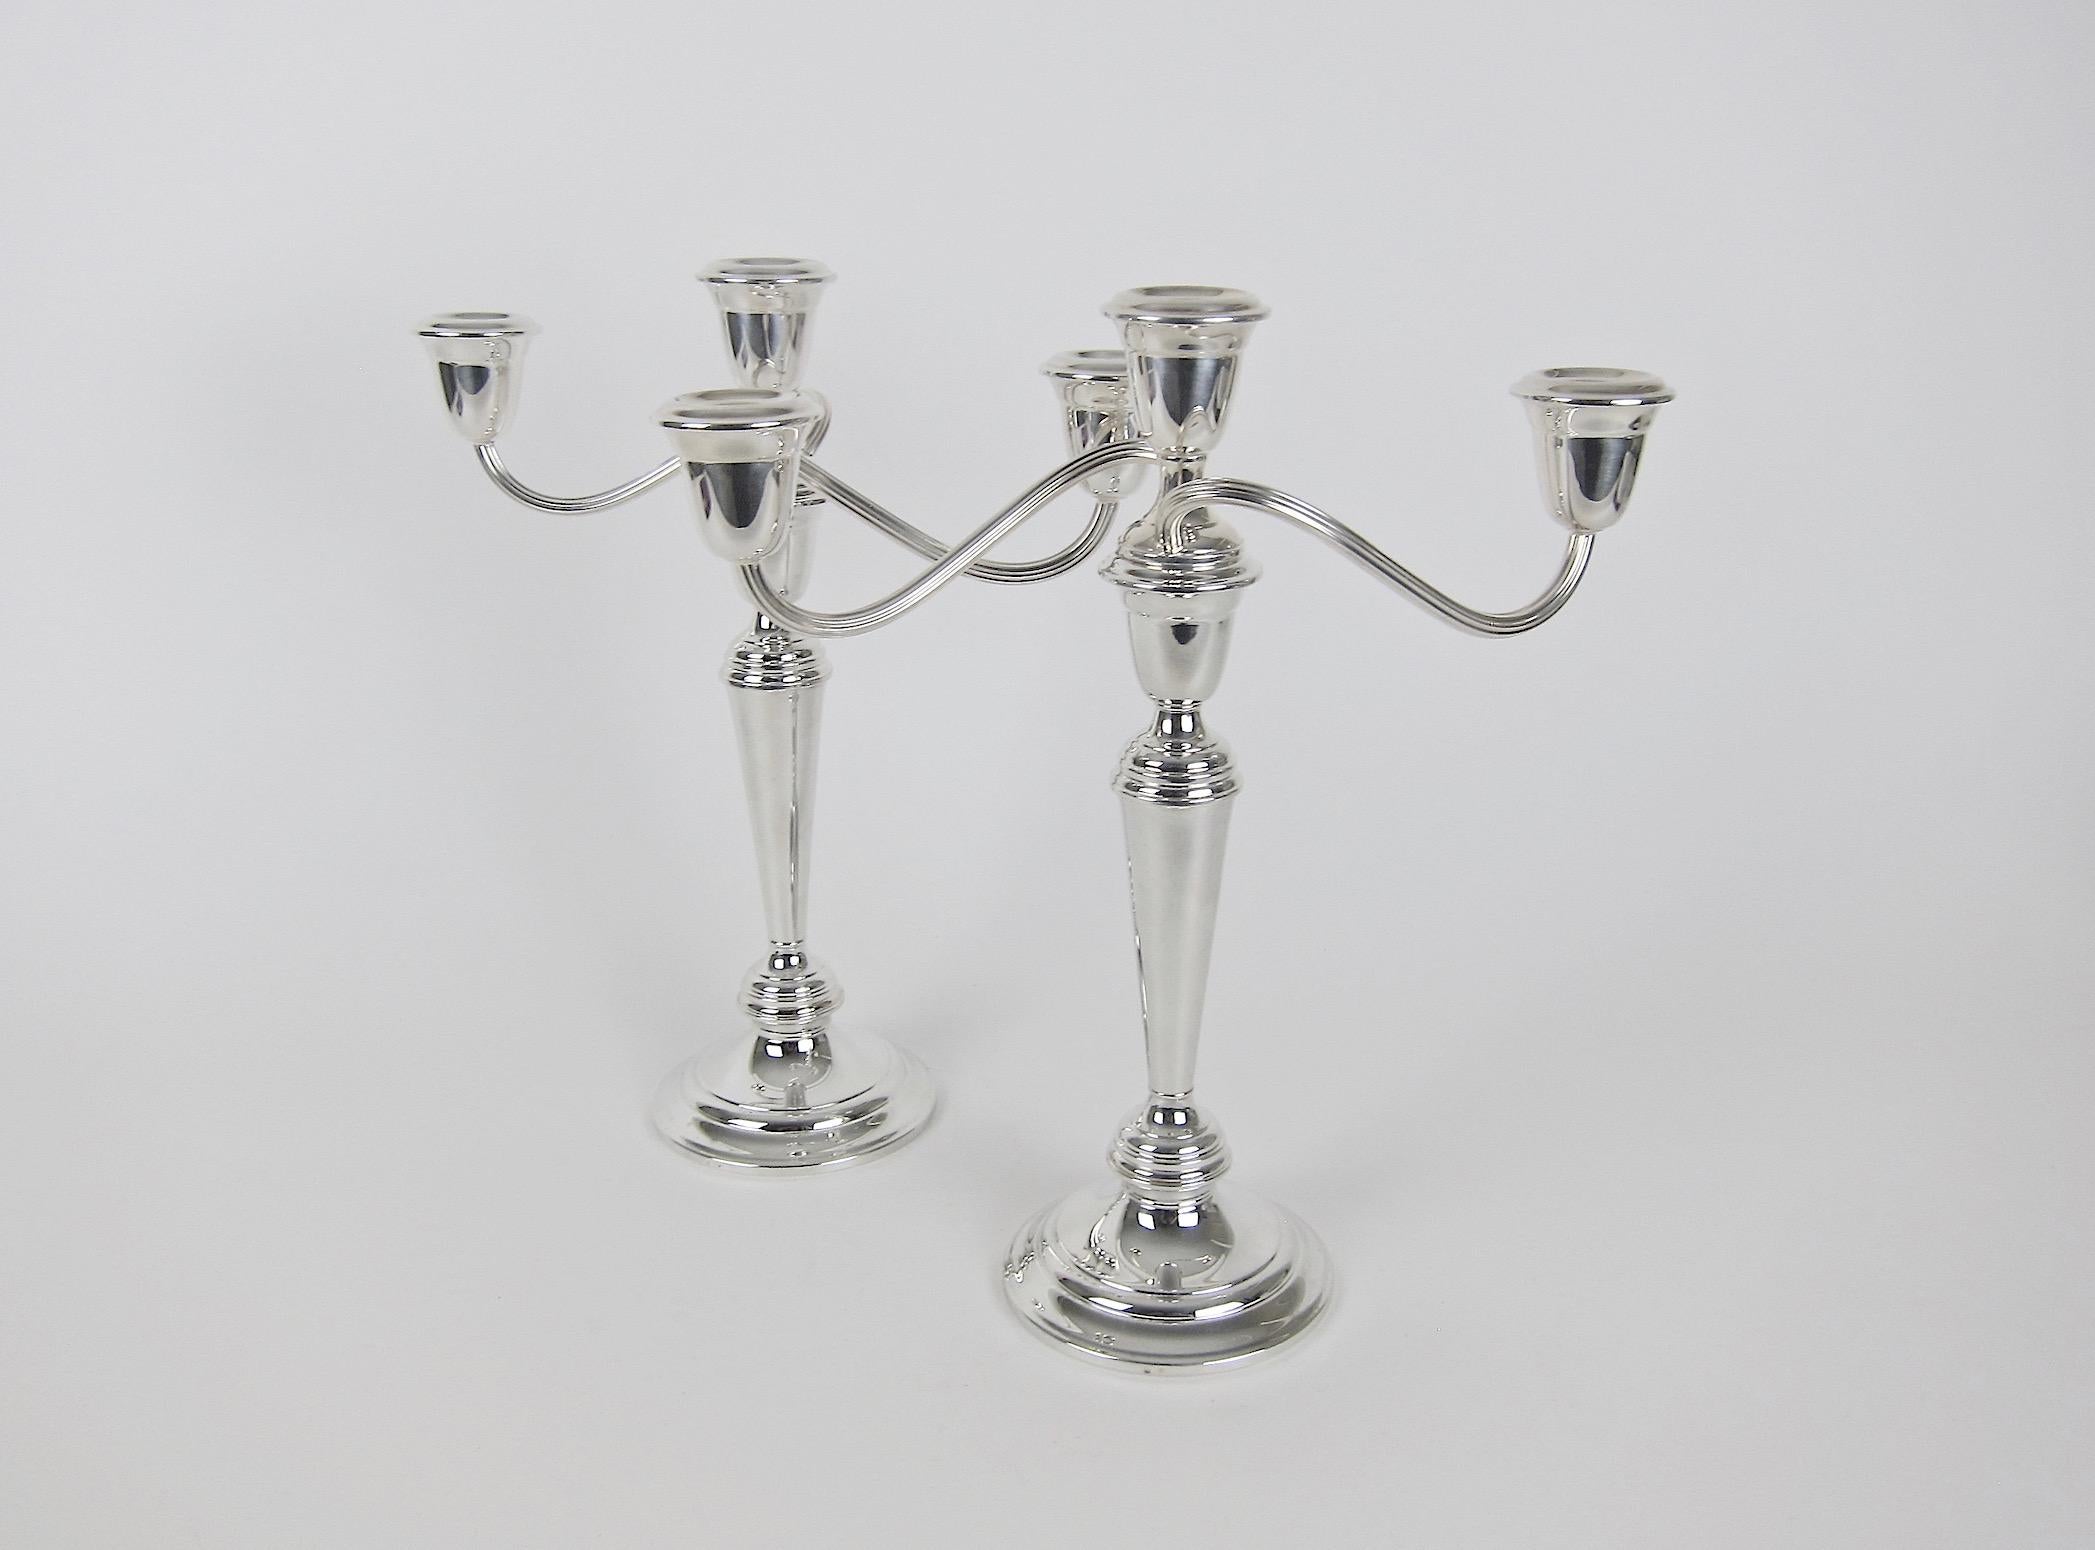 A vintage convertible three light candelabra pair from Gorham Manufacturing Company of Providence, Rhode Island. The silver plated candleholders are each composed of four parts: a weighted circular base, a tapering stem, an urn, and reeded twisting